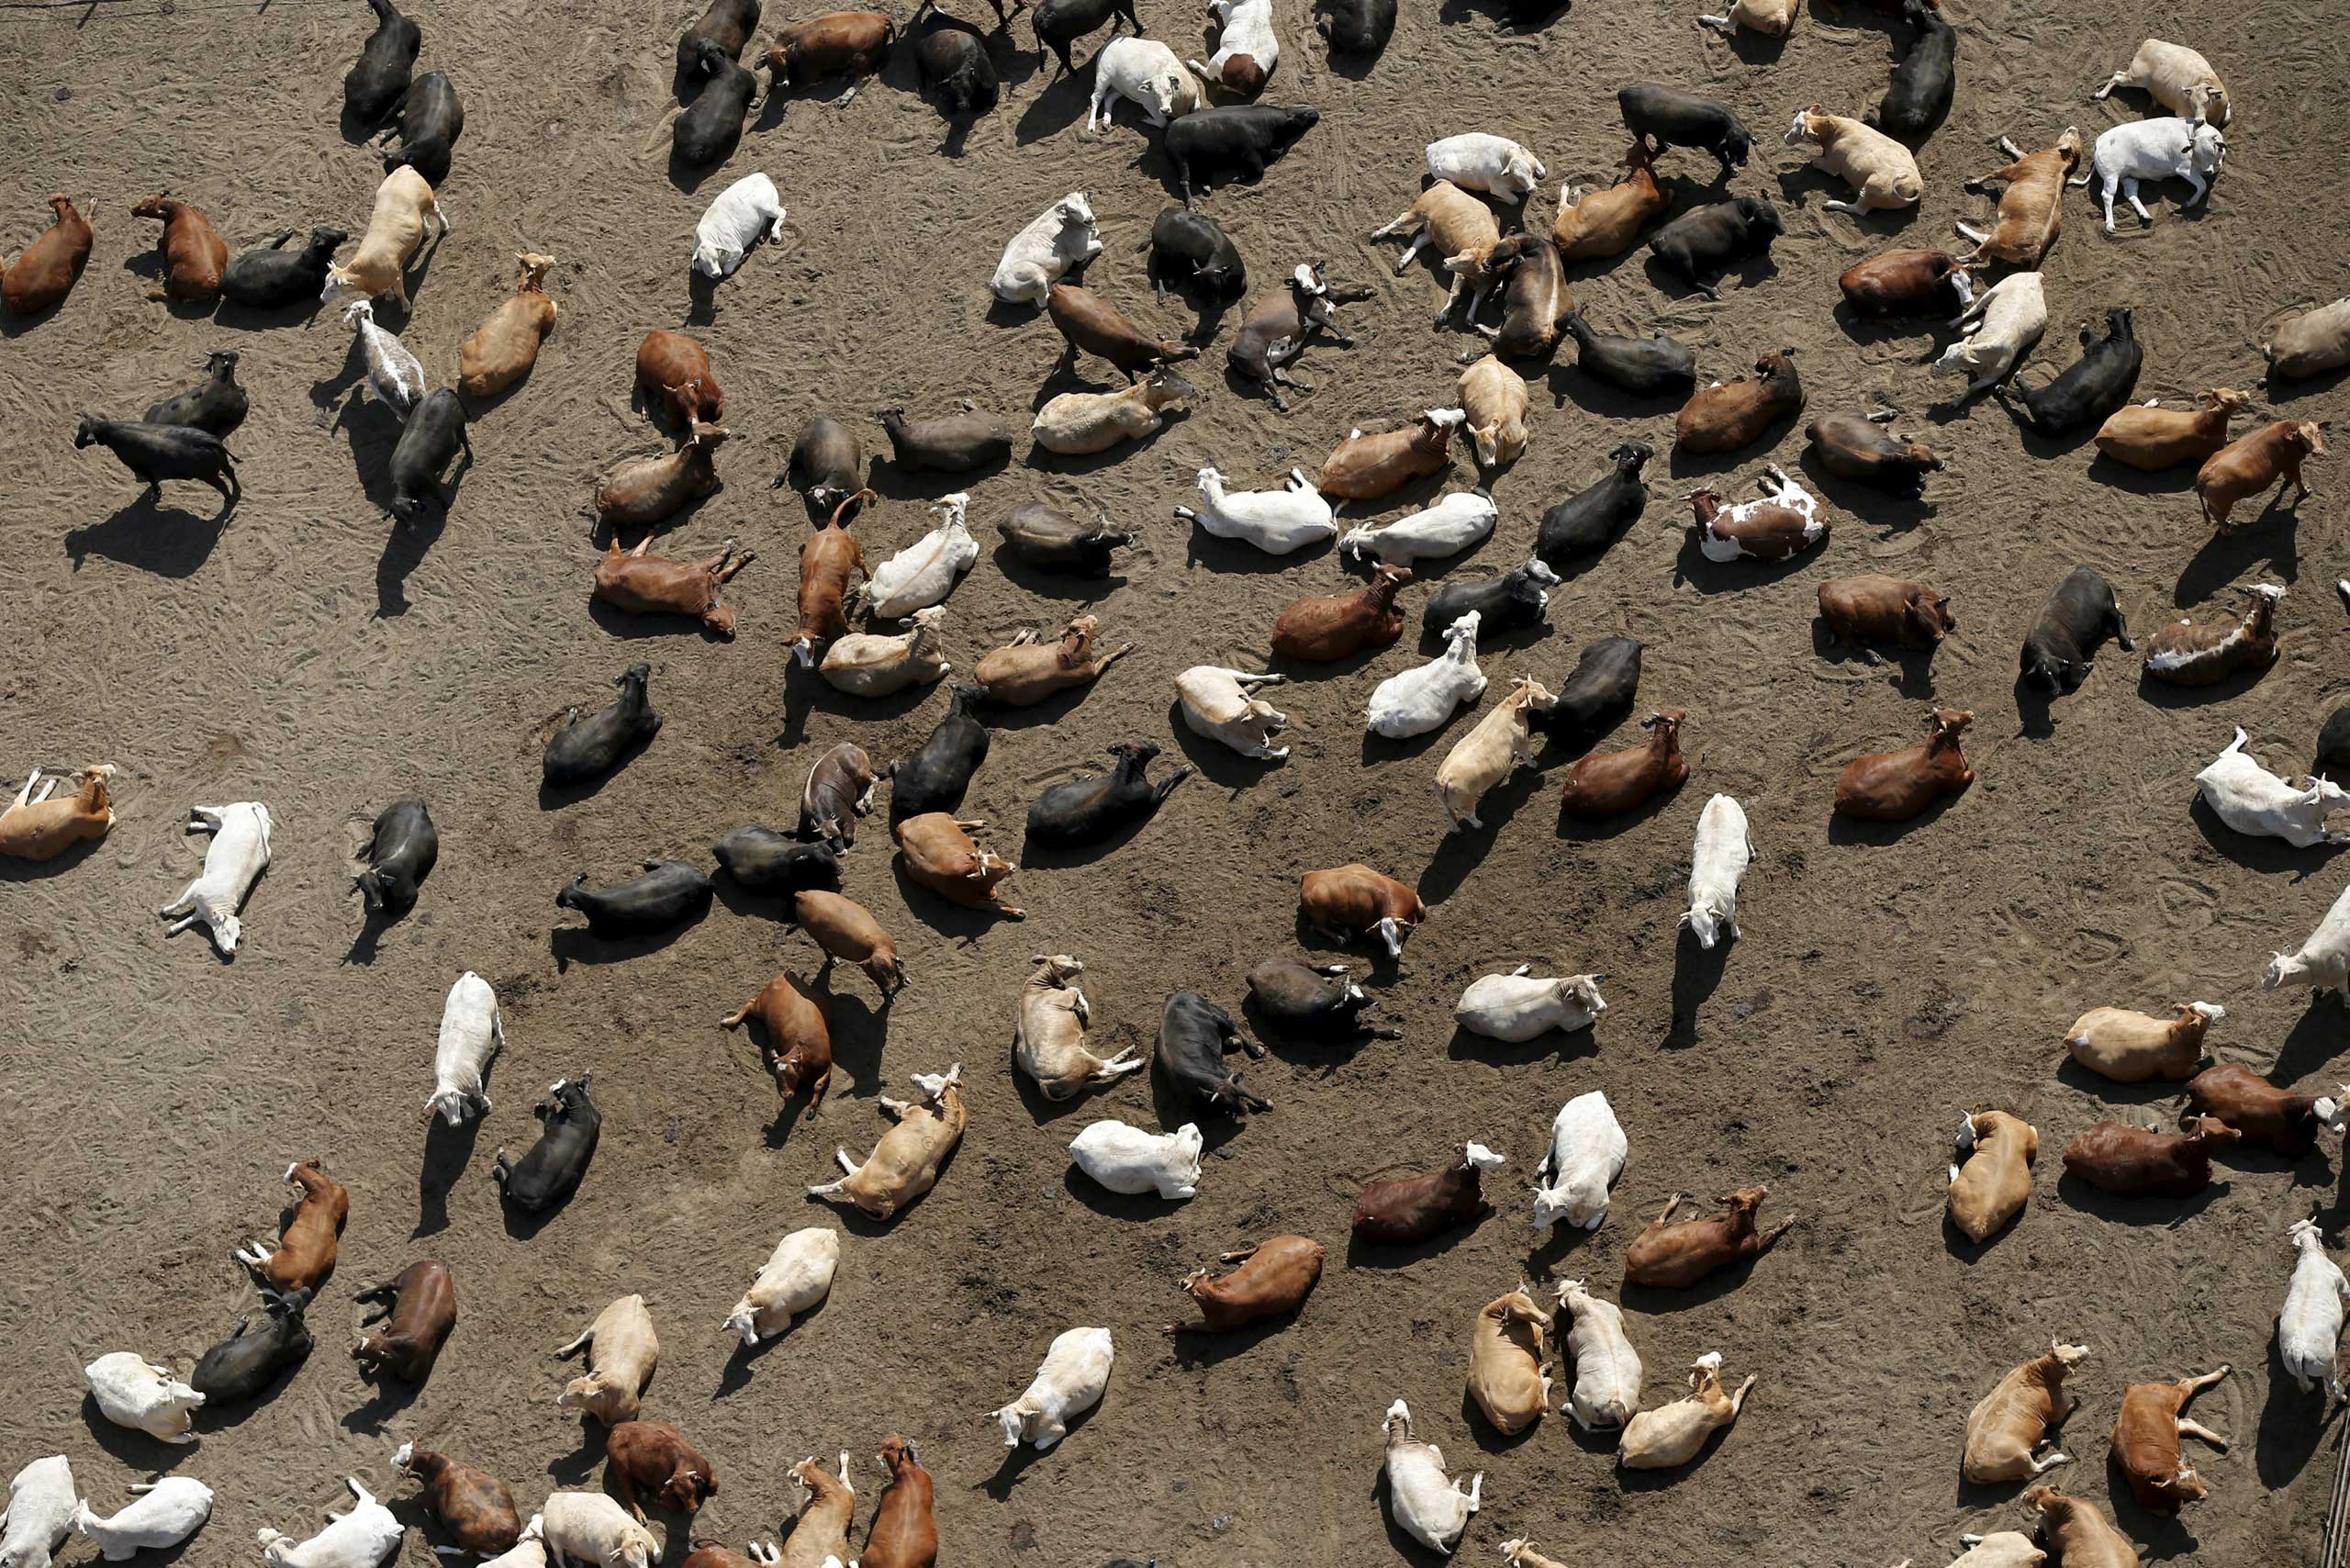 Livestock products, including meat, dairy and eggs, account for more than a quarter of California's agricultural sector, a $12.5 billion industry, according to the USDA. Cattle are among the most water-hungry livestock, consuming an average of106 gallons per pound of beef. Cattle are seen at Harris Ranch in Coalinga, Calif. on May 5, 2015.